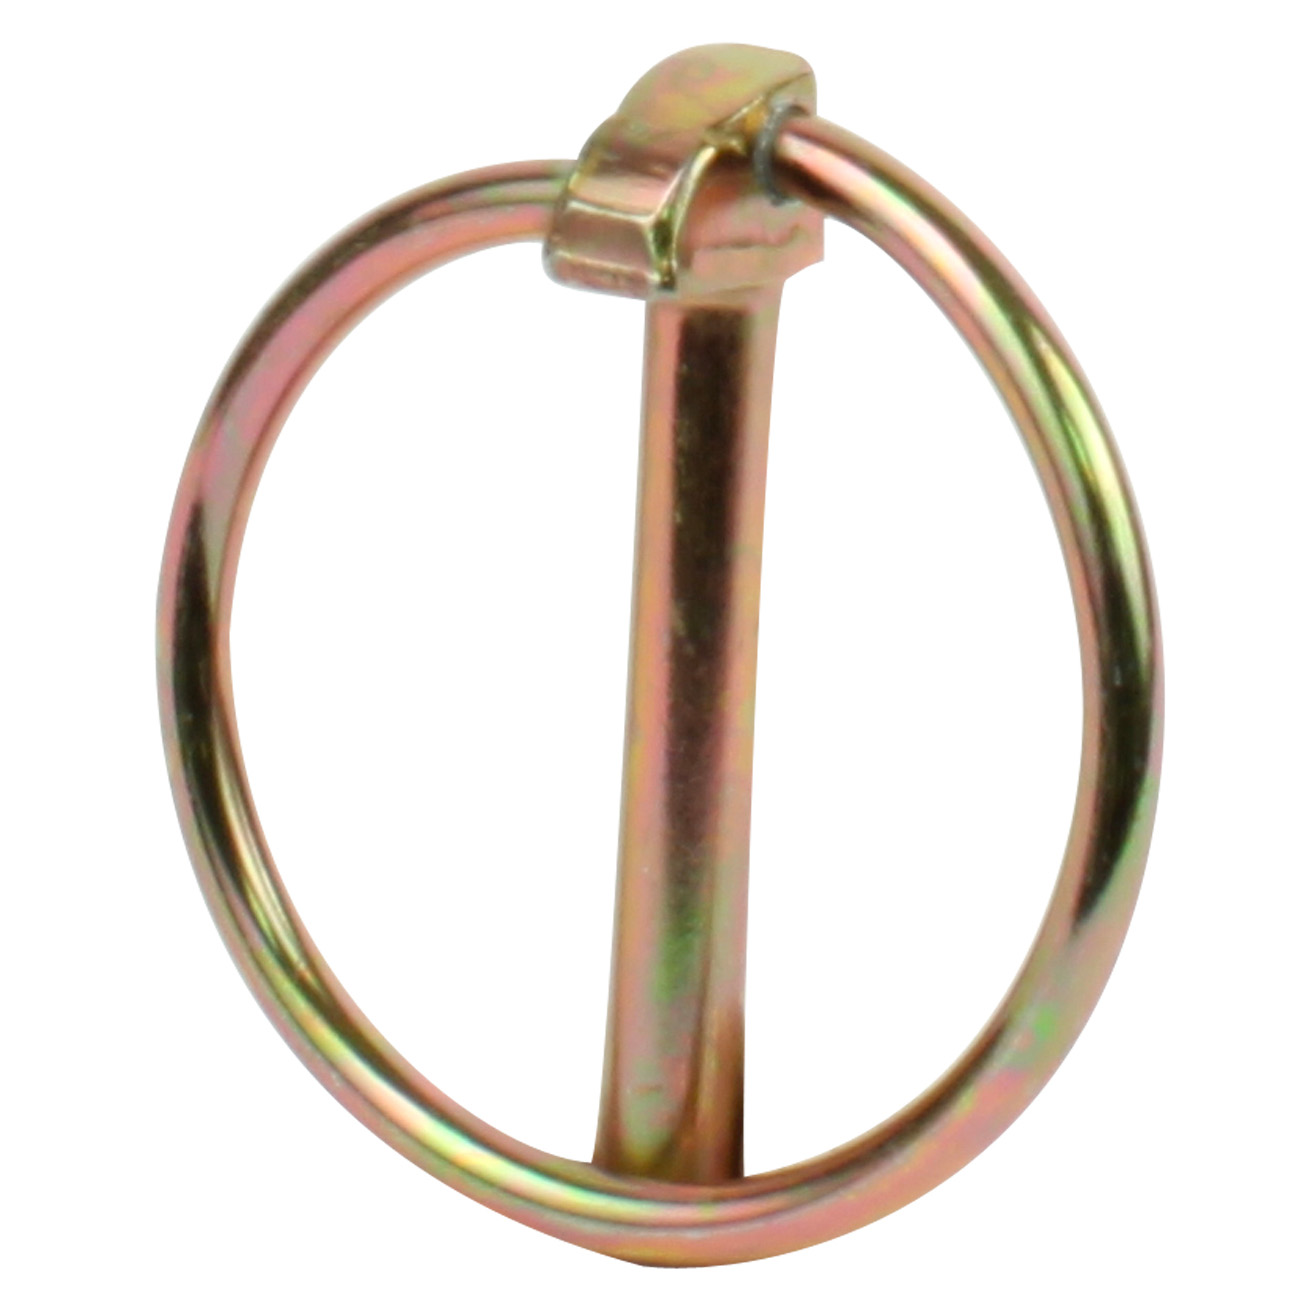 Linch pin - Linch - Zinc plated steel - 